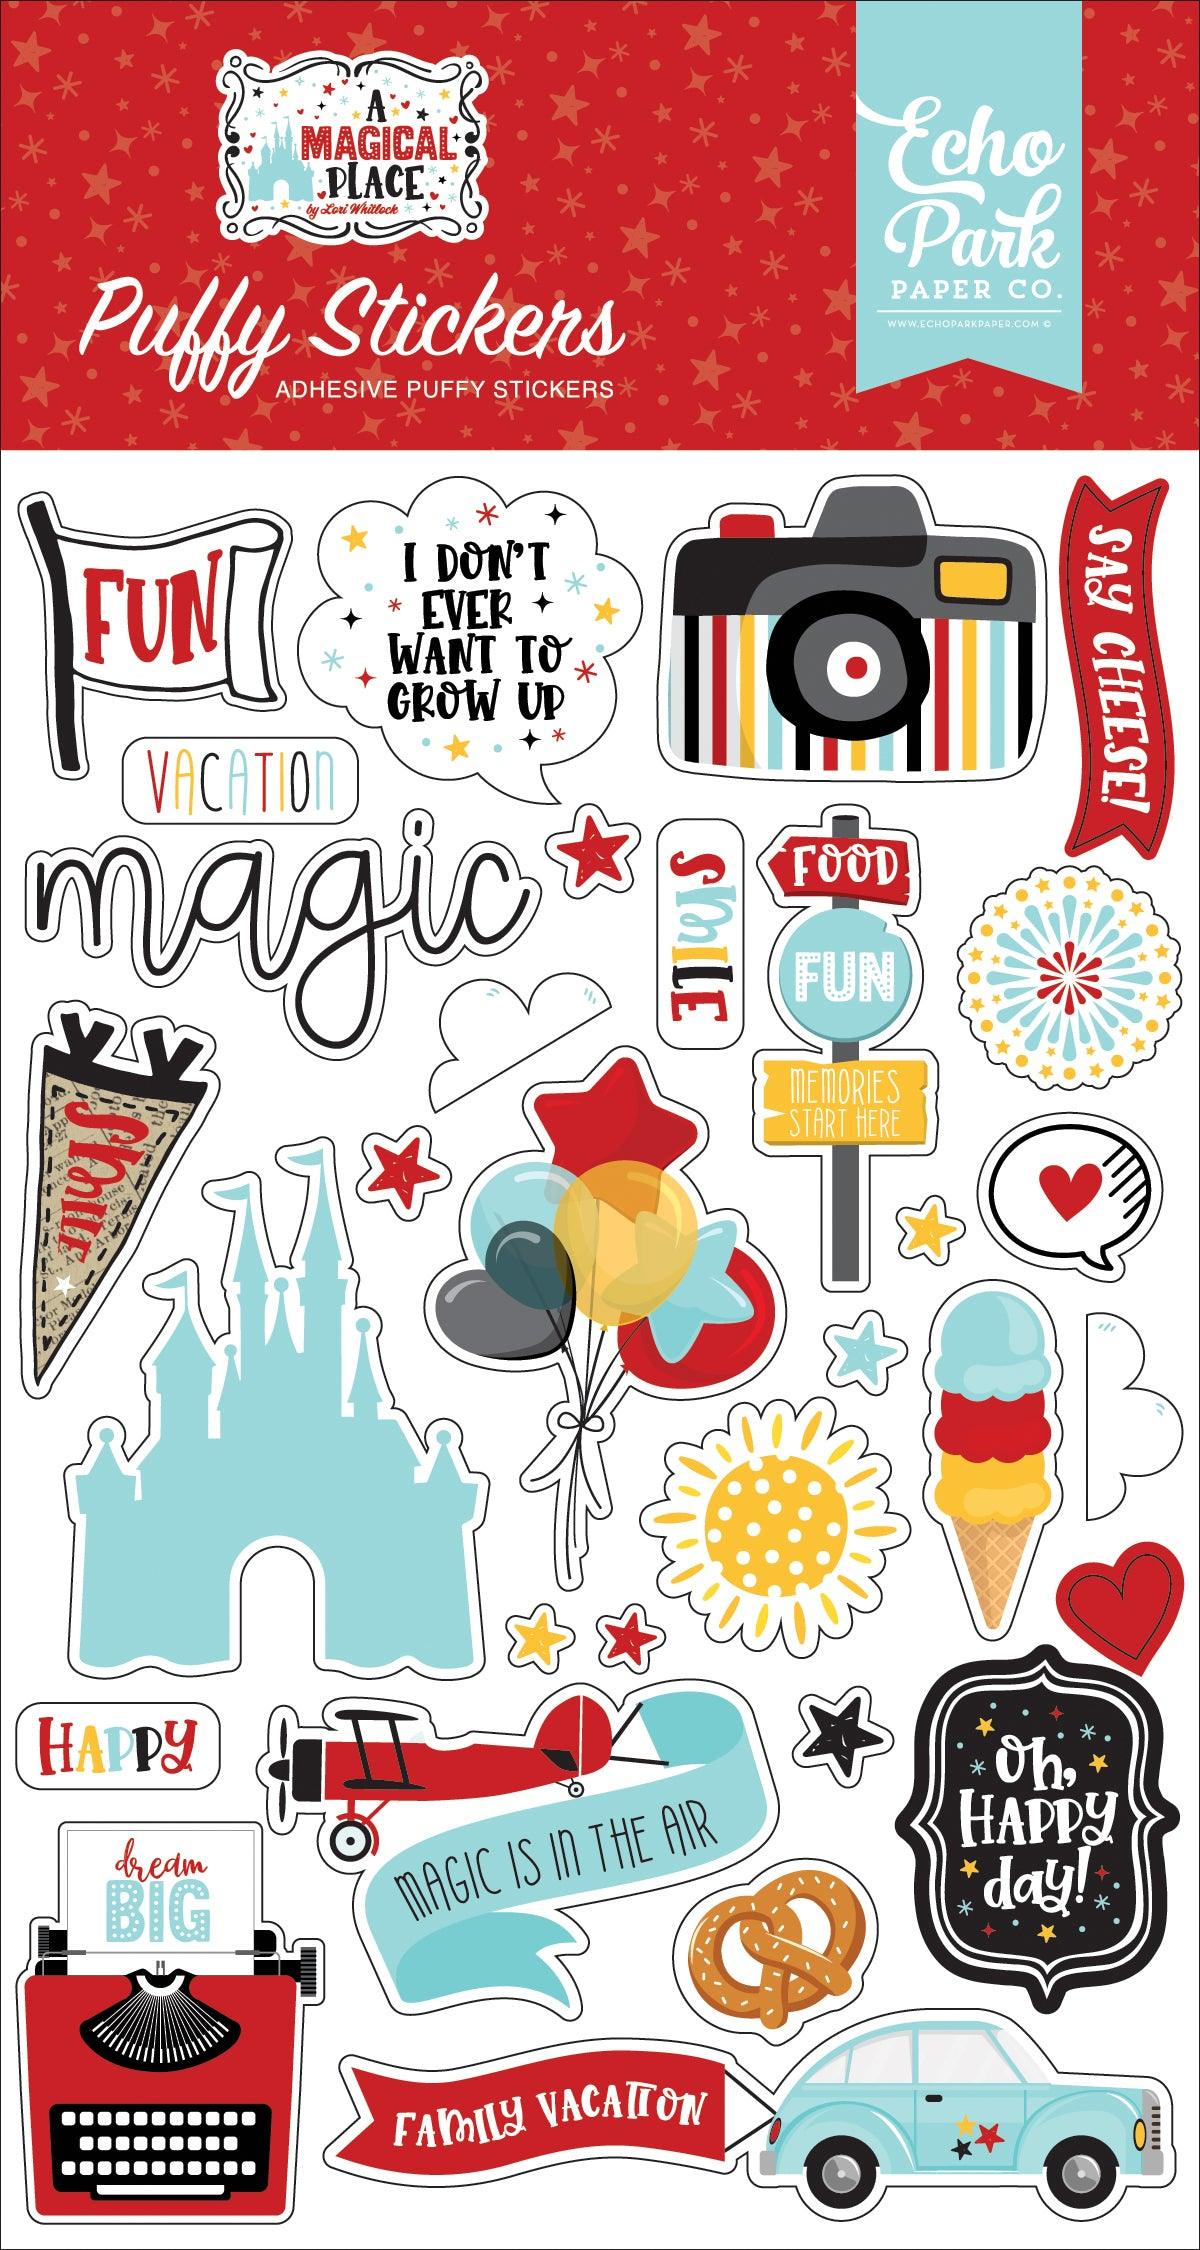 A Magical Place Collection 4 x 7 Puffy Stickers Scrapbook Embellishments by Echo Park Paper - Scrapbook Supply Companies